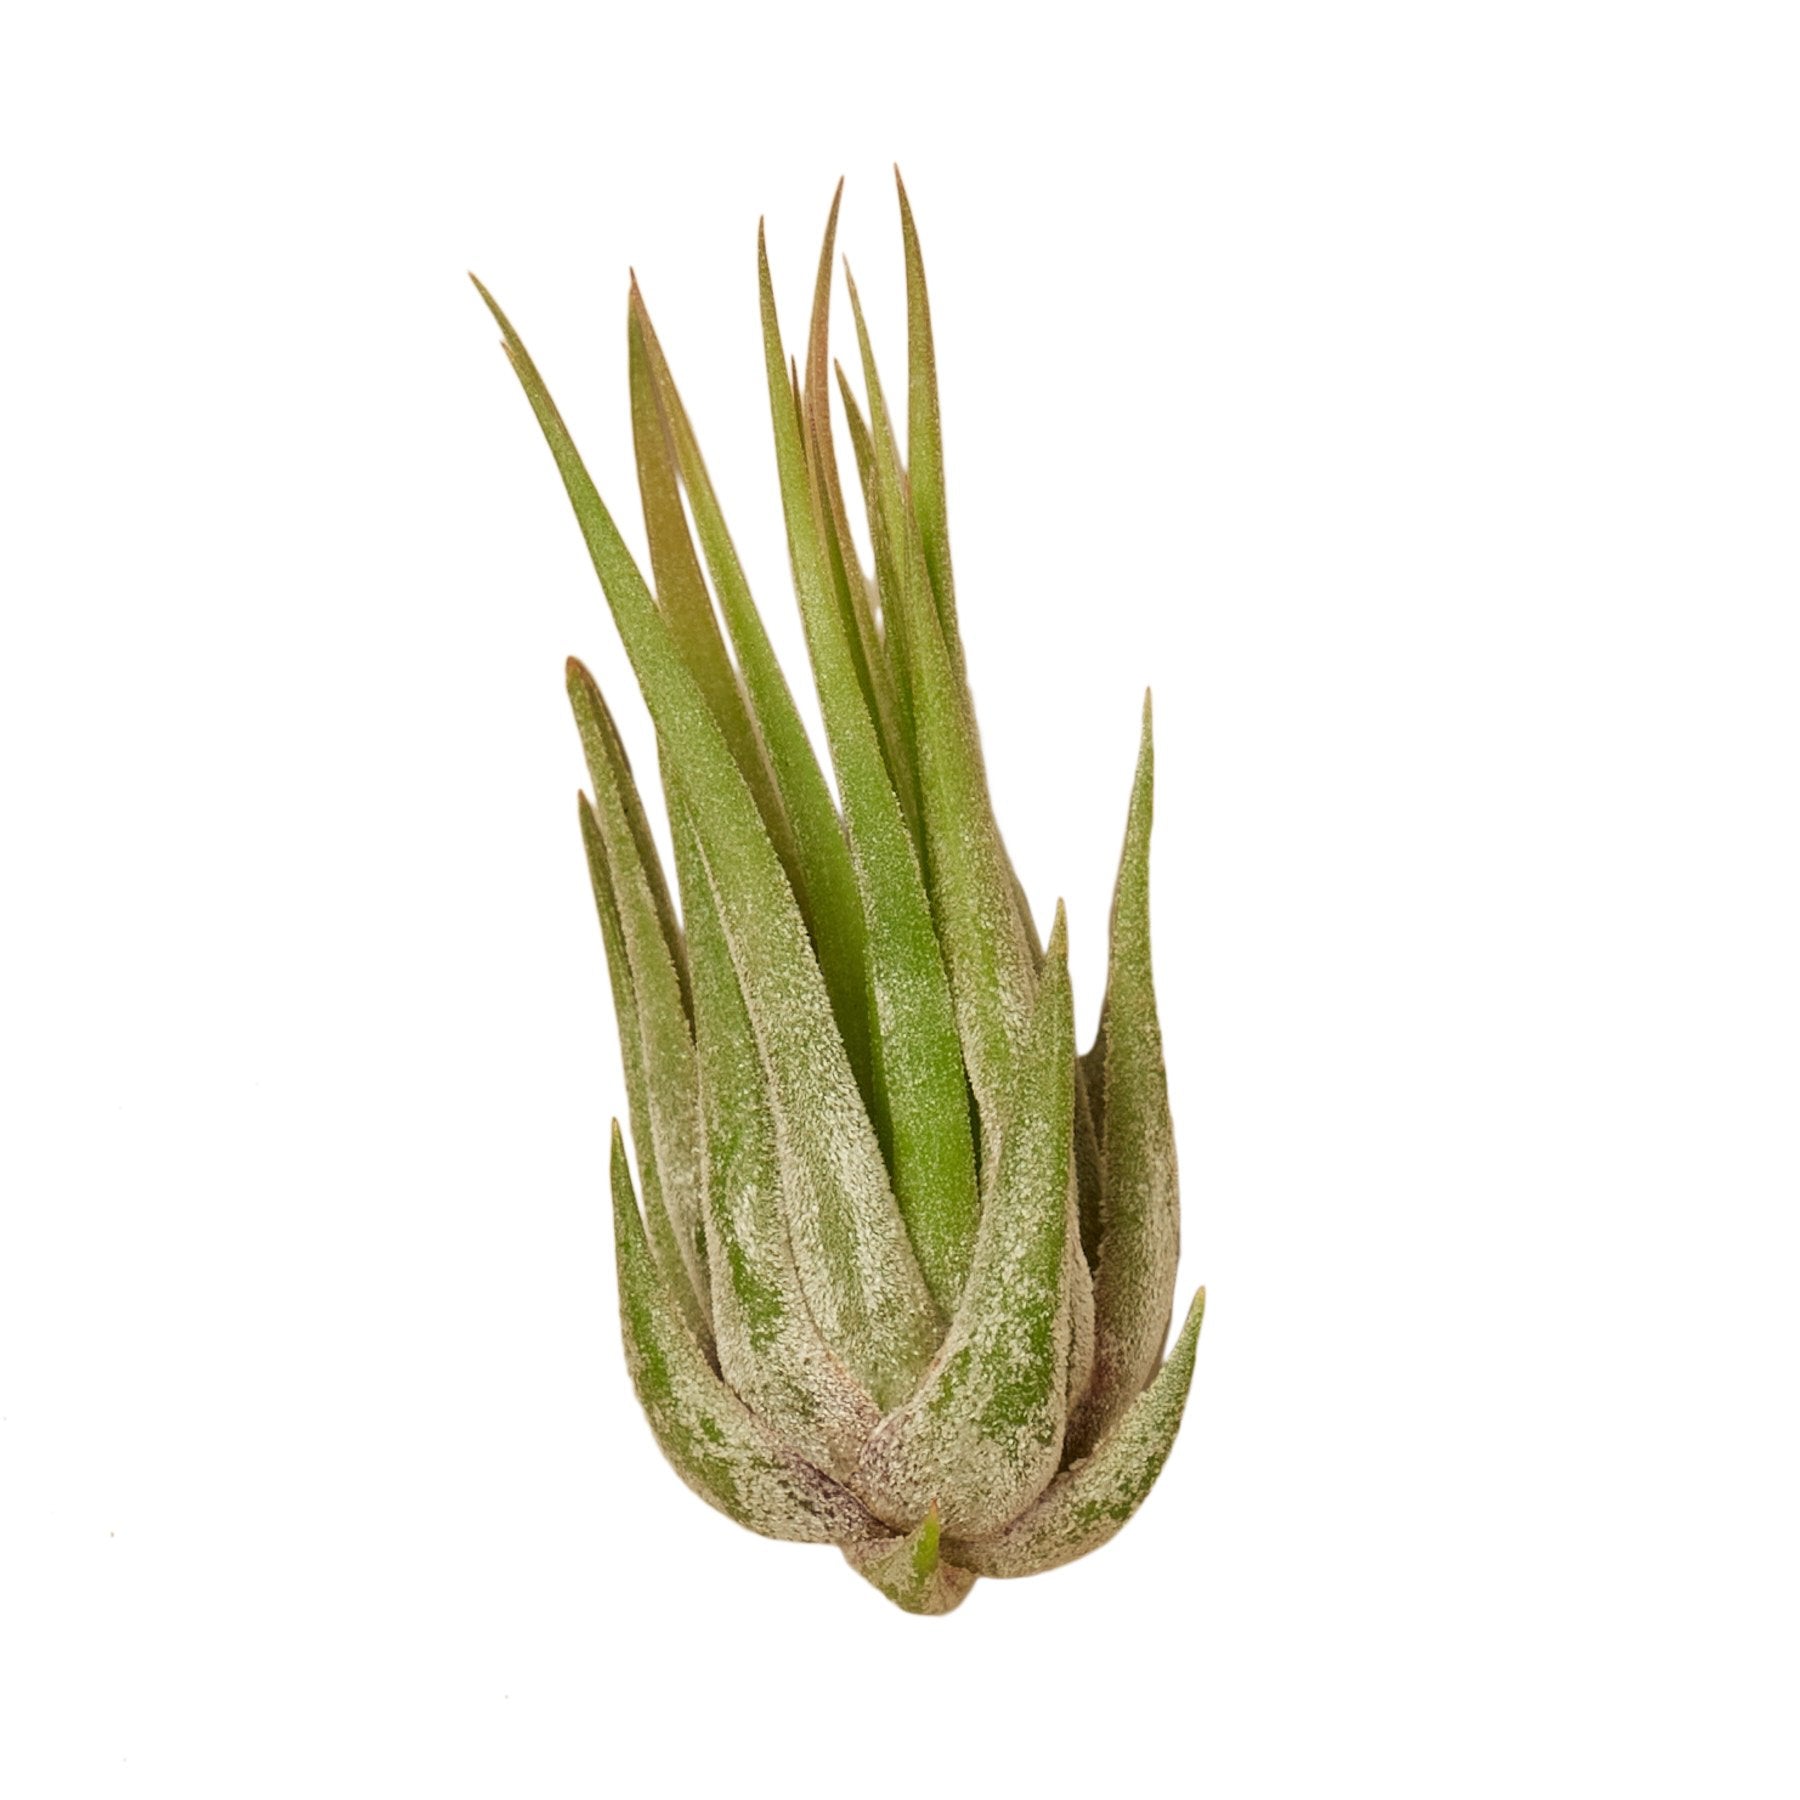 A small air plant on a white background in a garden center near me.